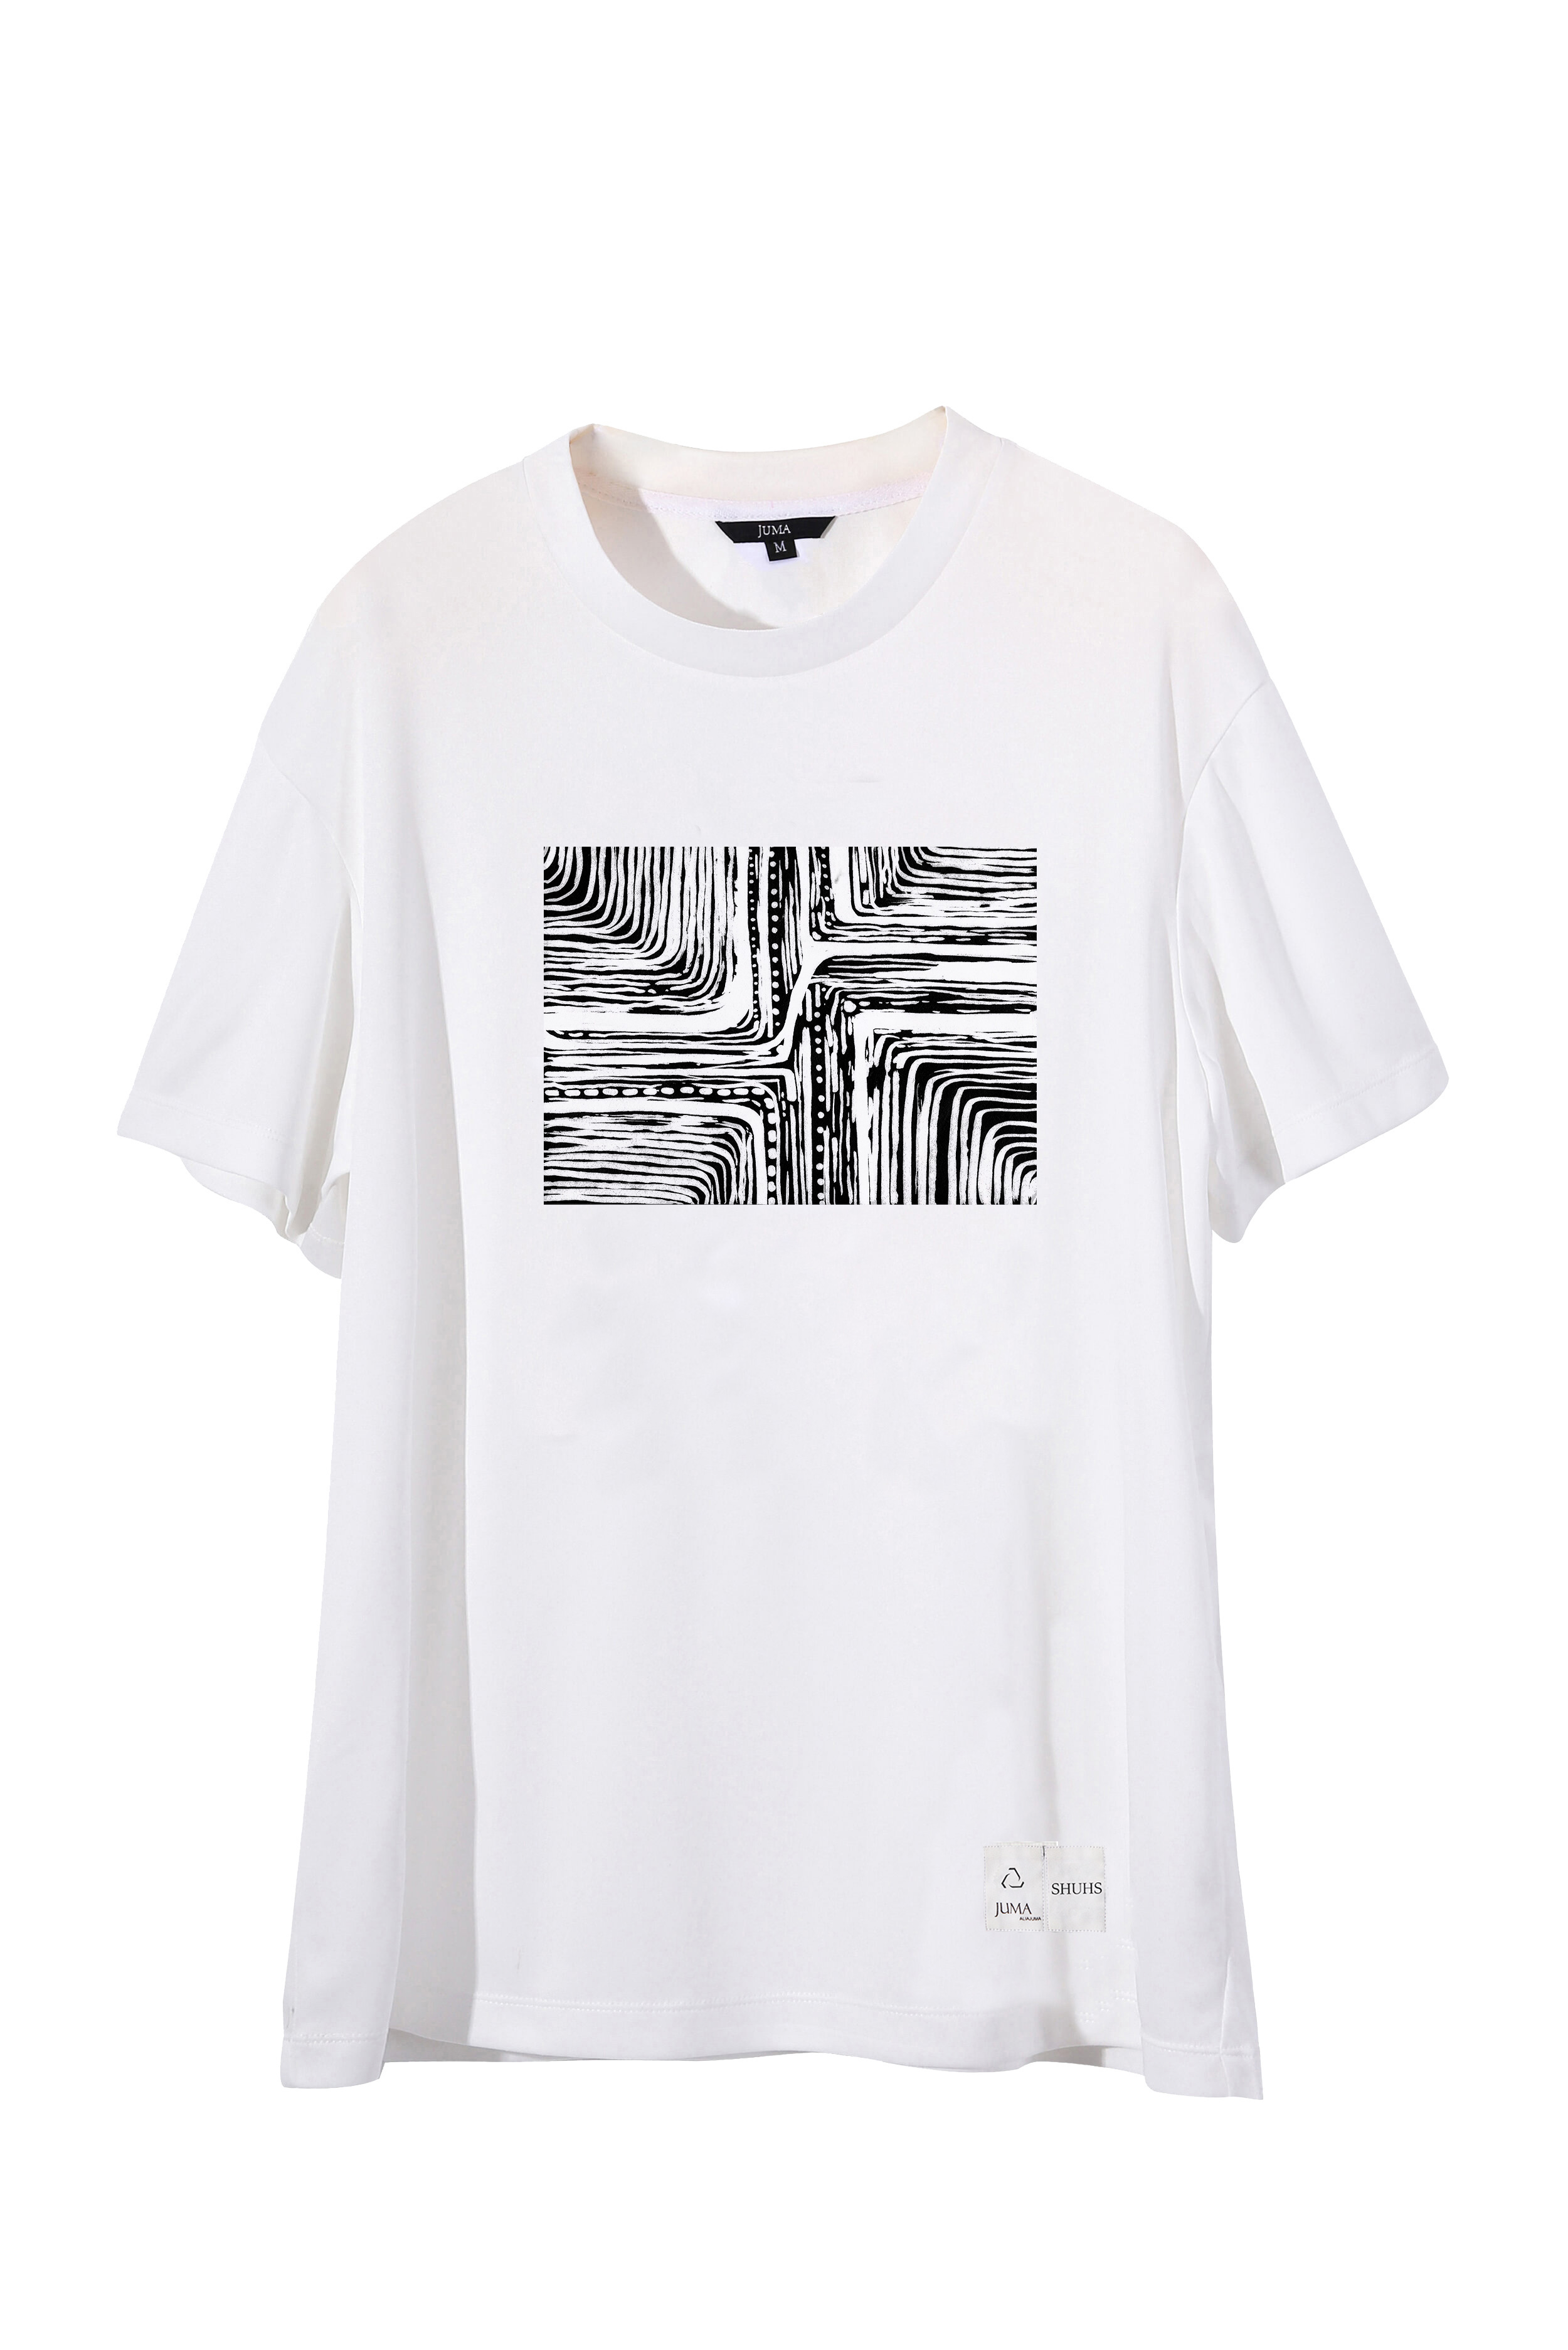 Recharge 印花 4 件 T 恤 - 4 个再生水瓶 - 黑色｜Recharge Print 4 T-Shirt - 4 Recycled Water Bottles-Black